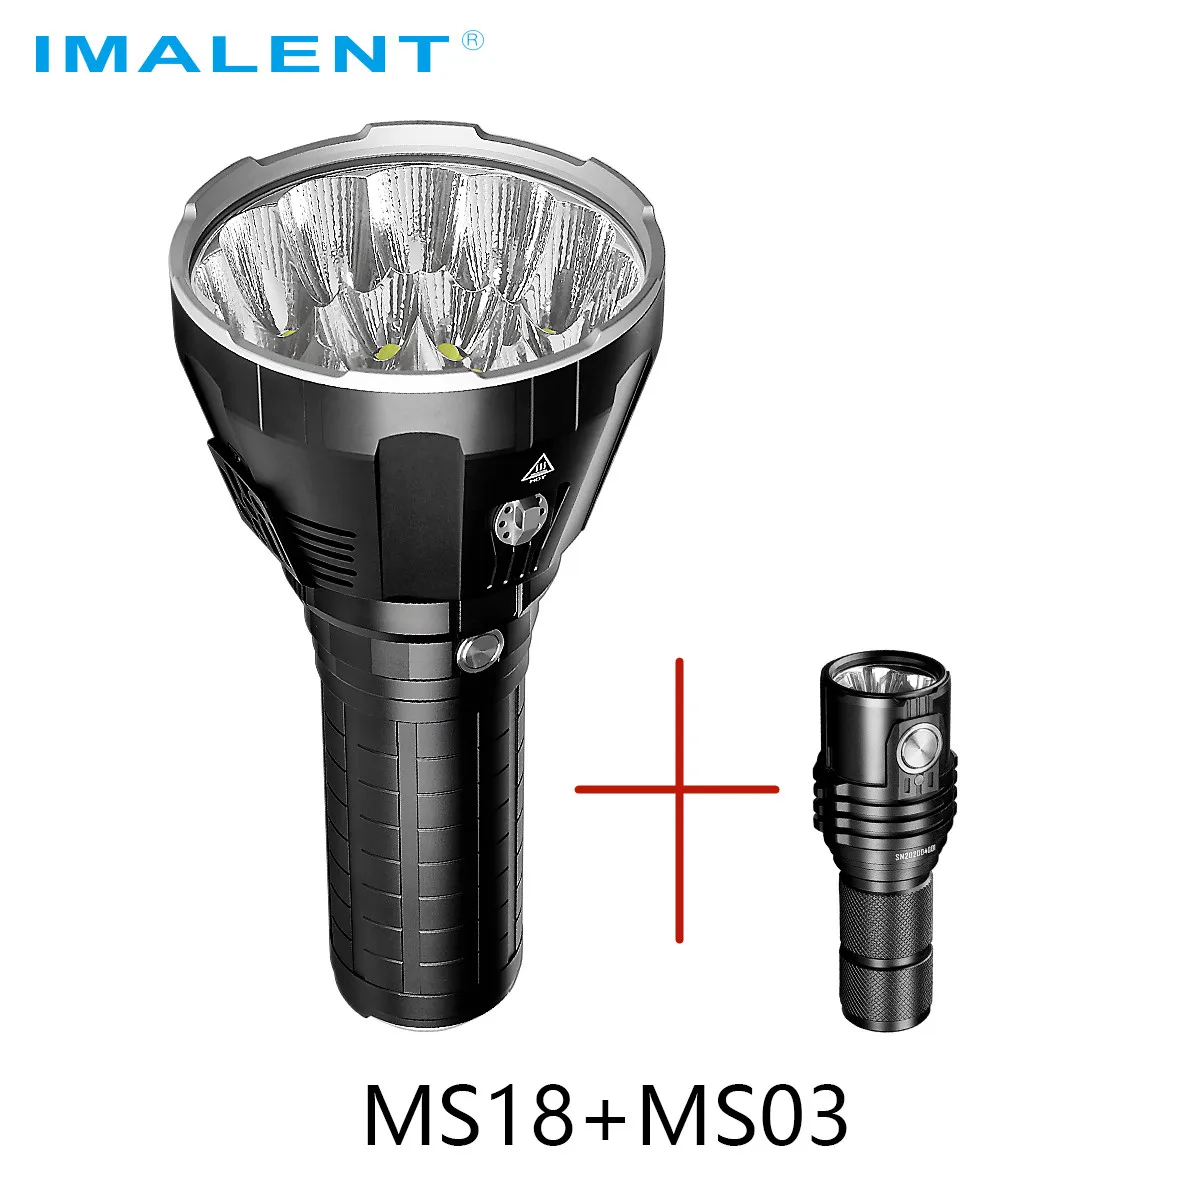 IMALENT MS18+MS03 Professional Convoy Flashlight Rechargeable 6-8 Mode 25000LM CREE XHP Led Lamp Portable Survival Equipment